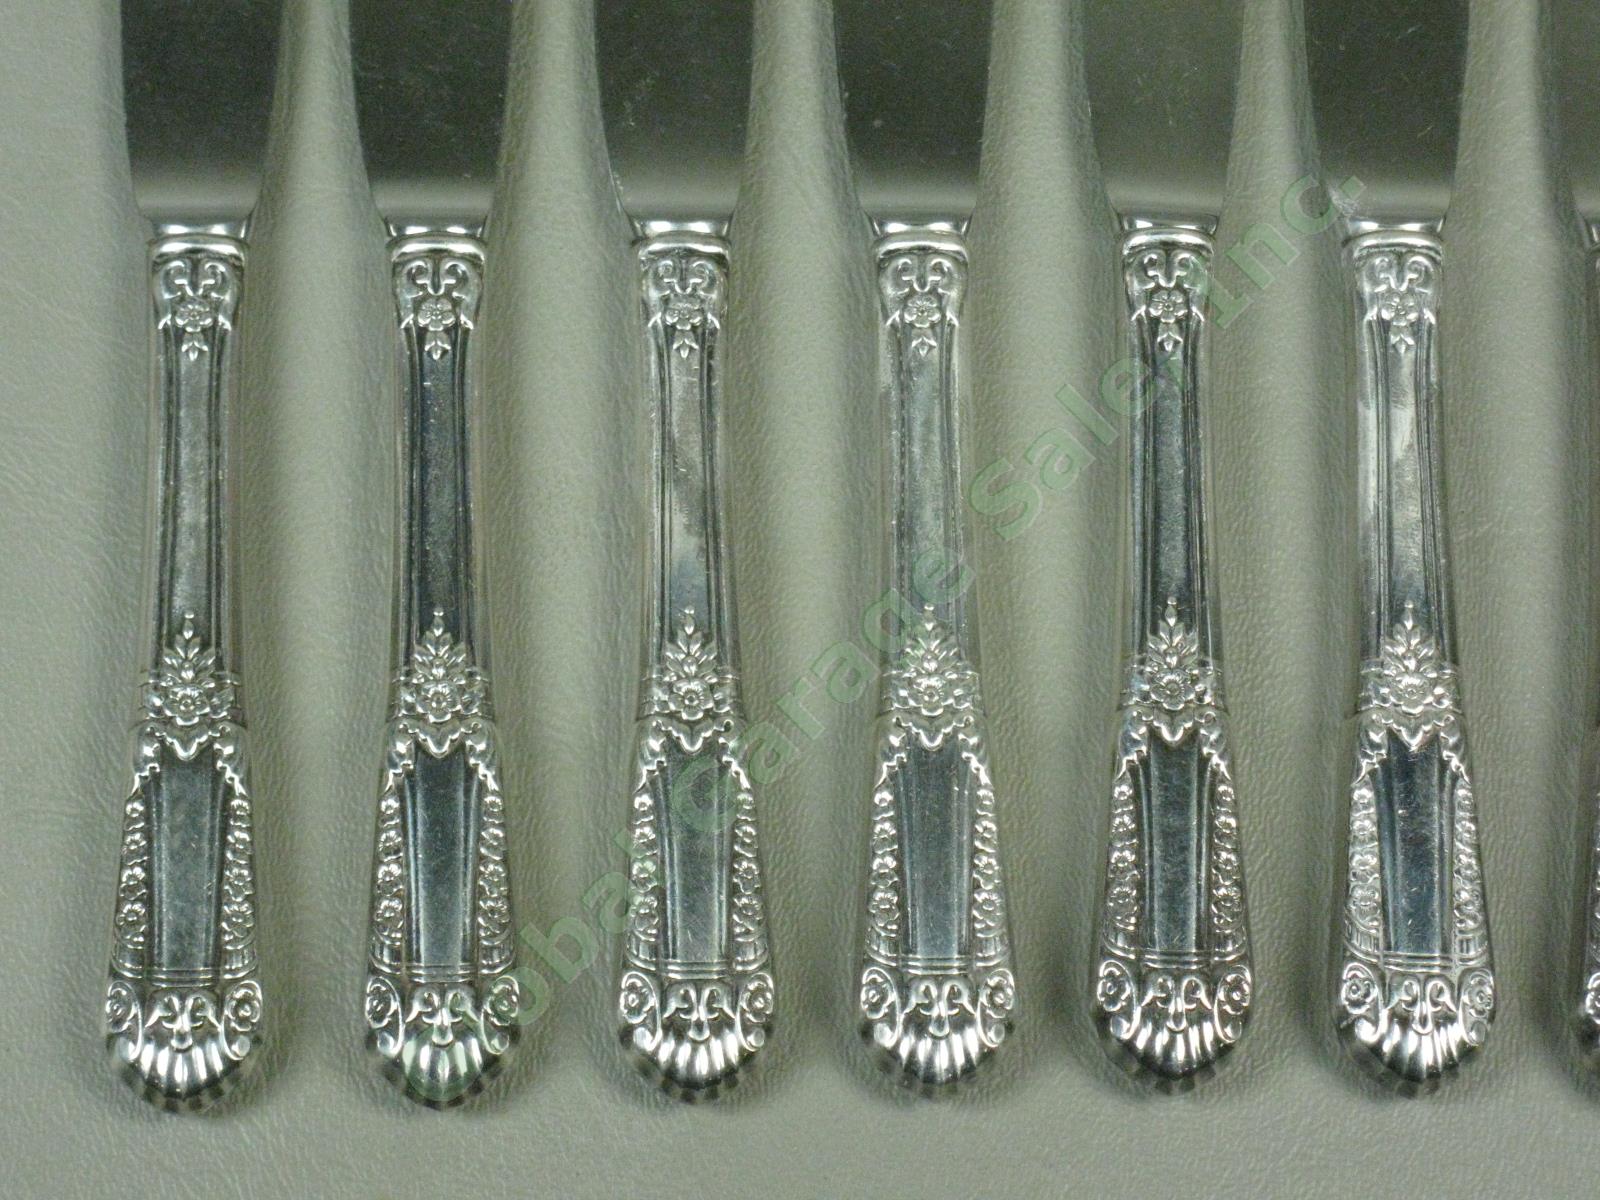 7 State House Inaugural Sterling Silver Dinner Knives Silverware Flatware Set NR 2